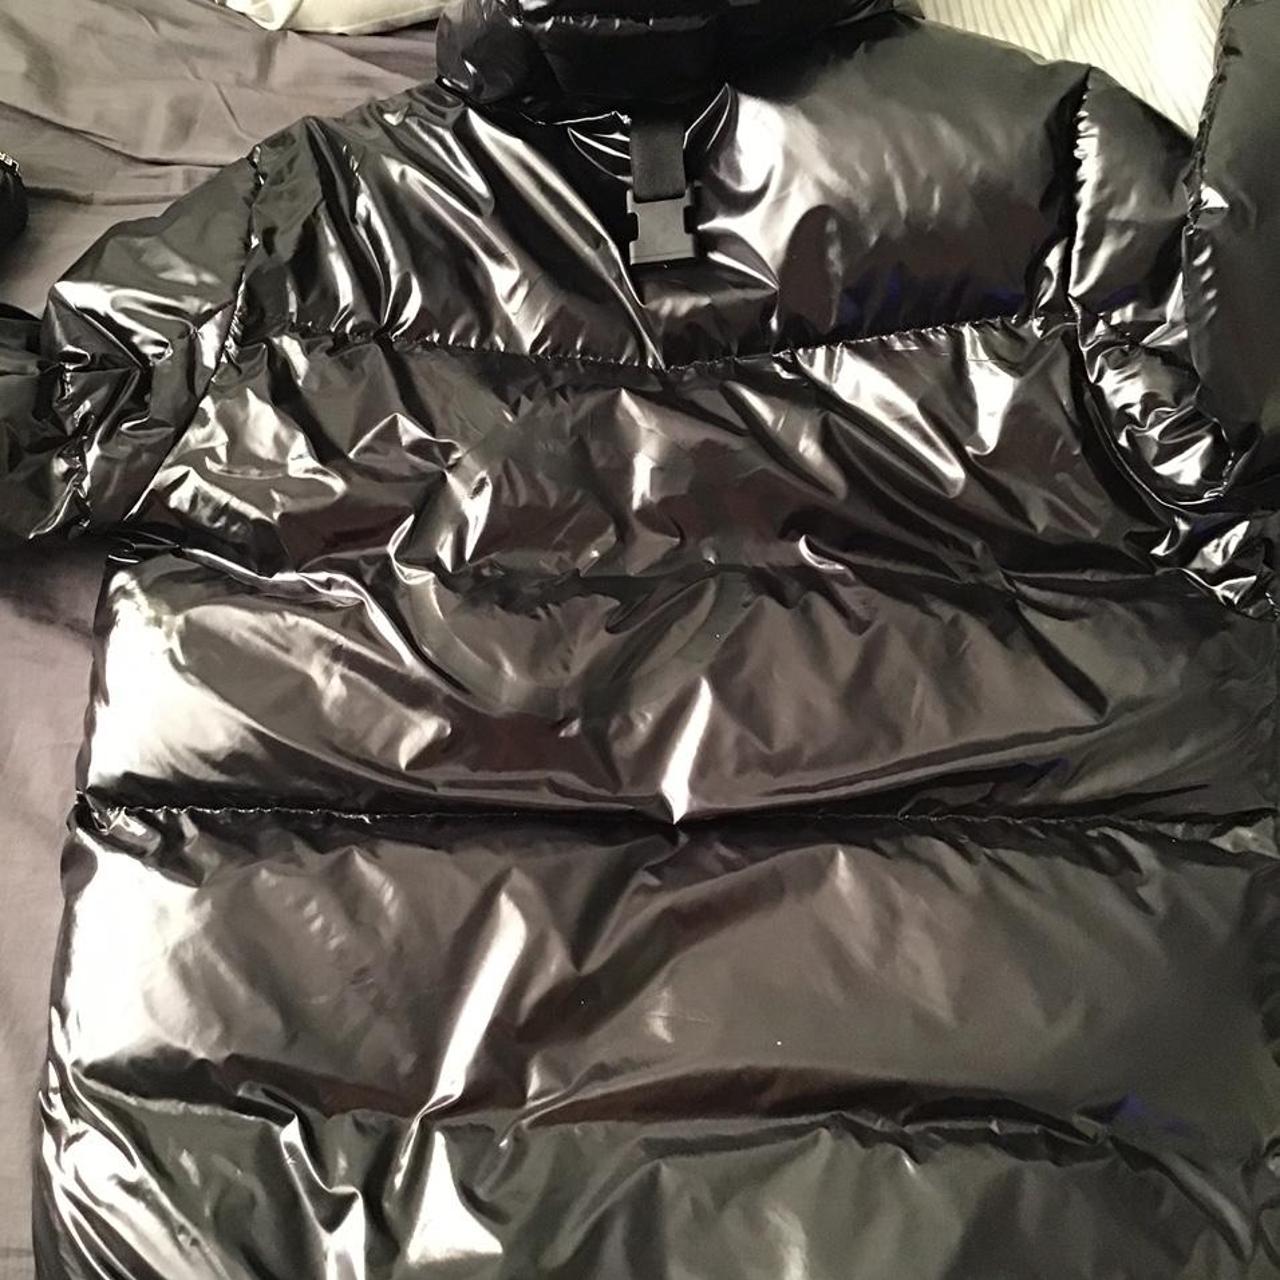 Moncler puffer jacket no receipt selling due to its... - Depop